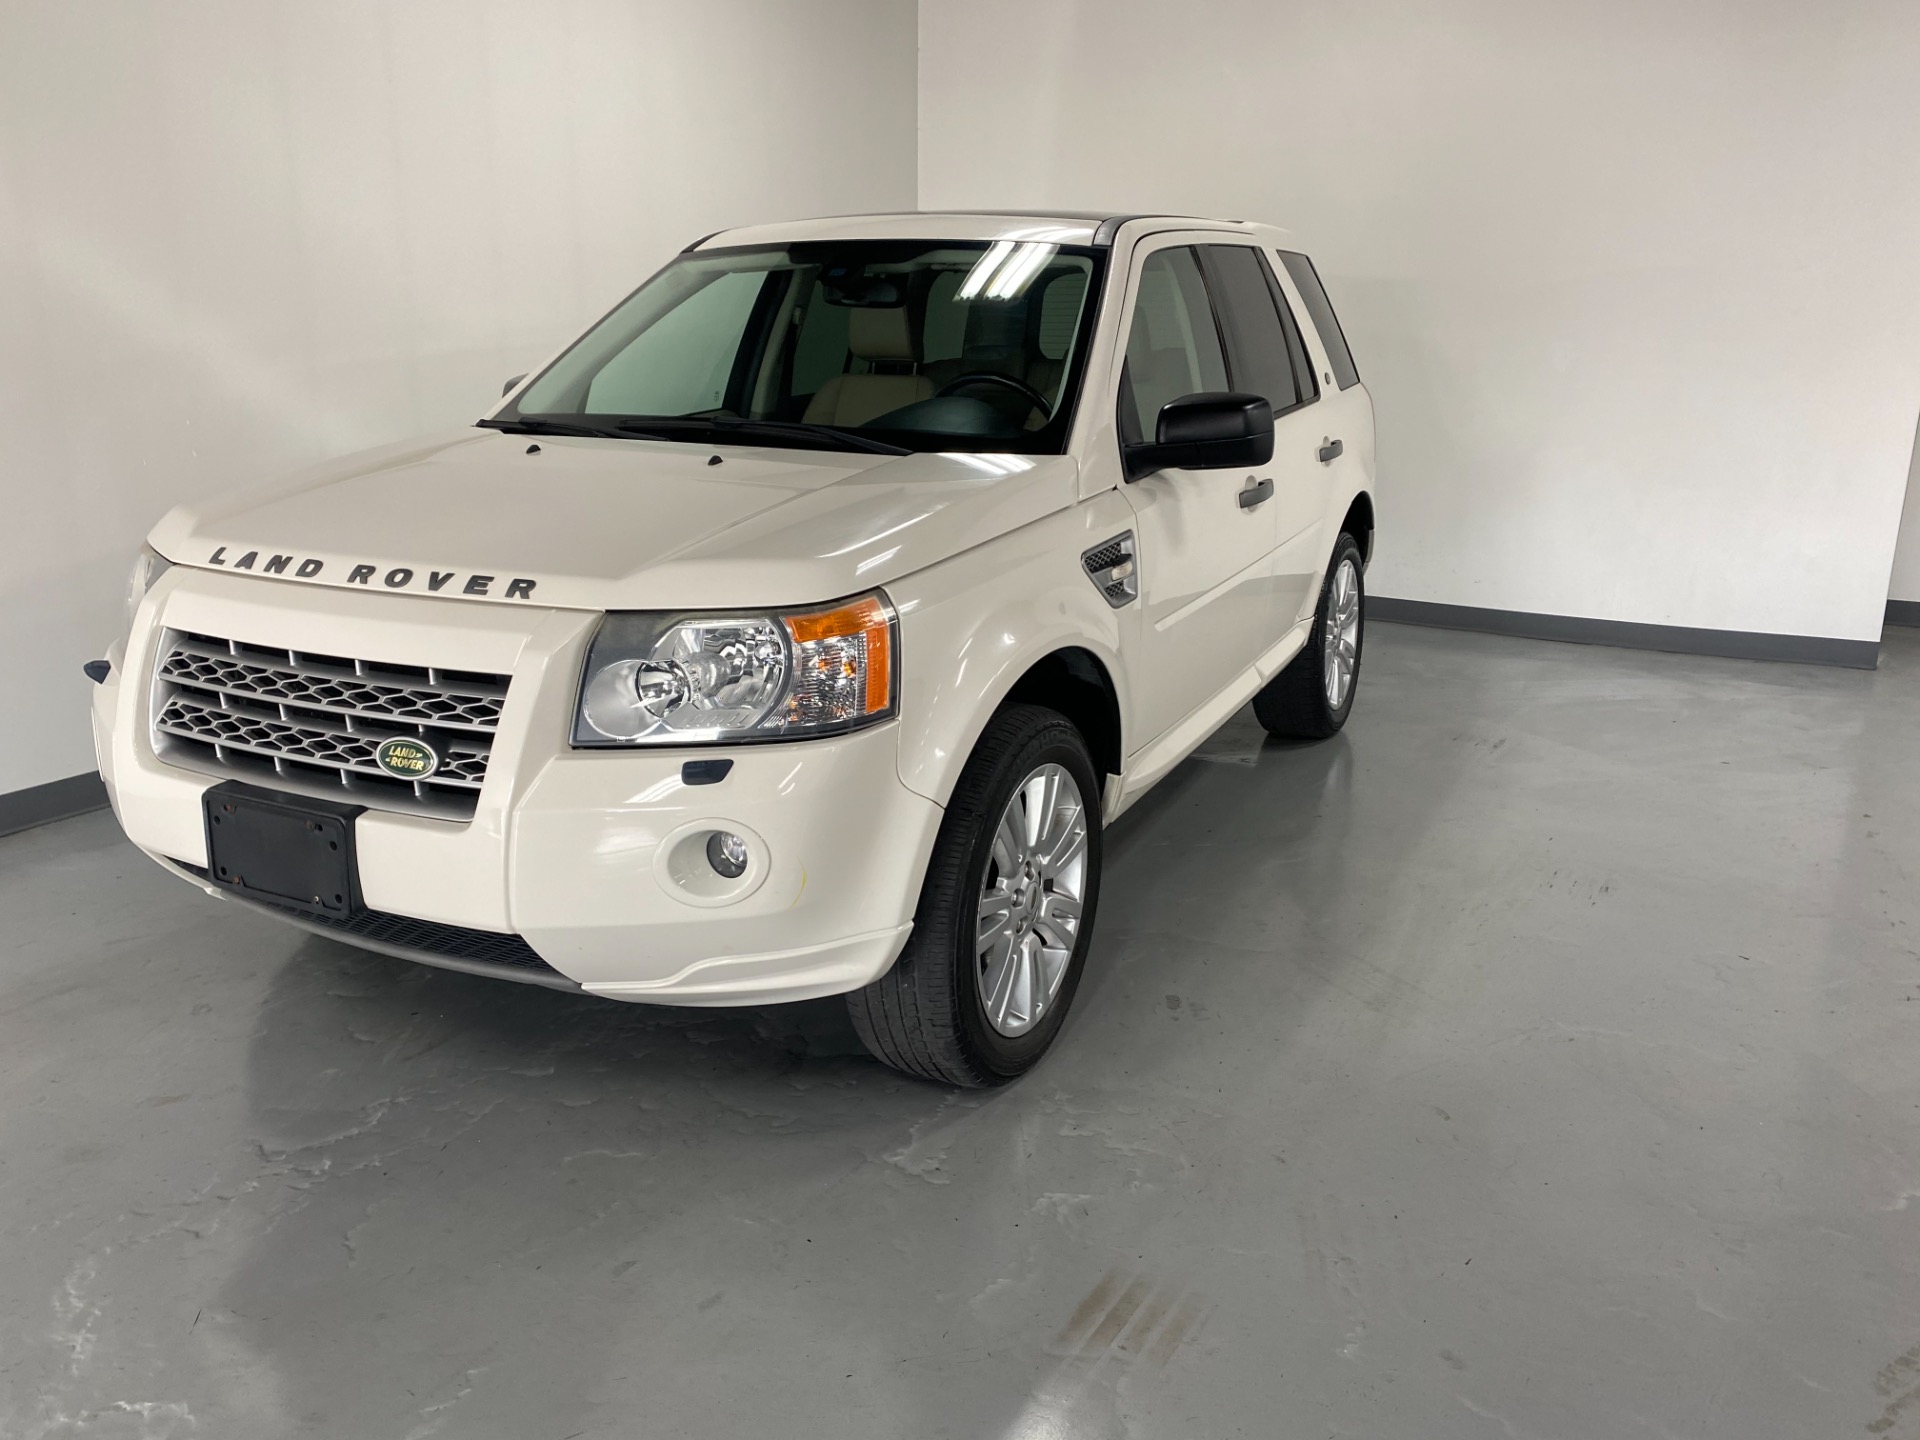 Used 2010 Alaska White Land Rover LR2 HSE AWD HSE For Sale (Sold) | Prime  Motorz Stock #3233